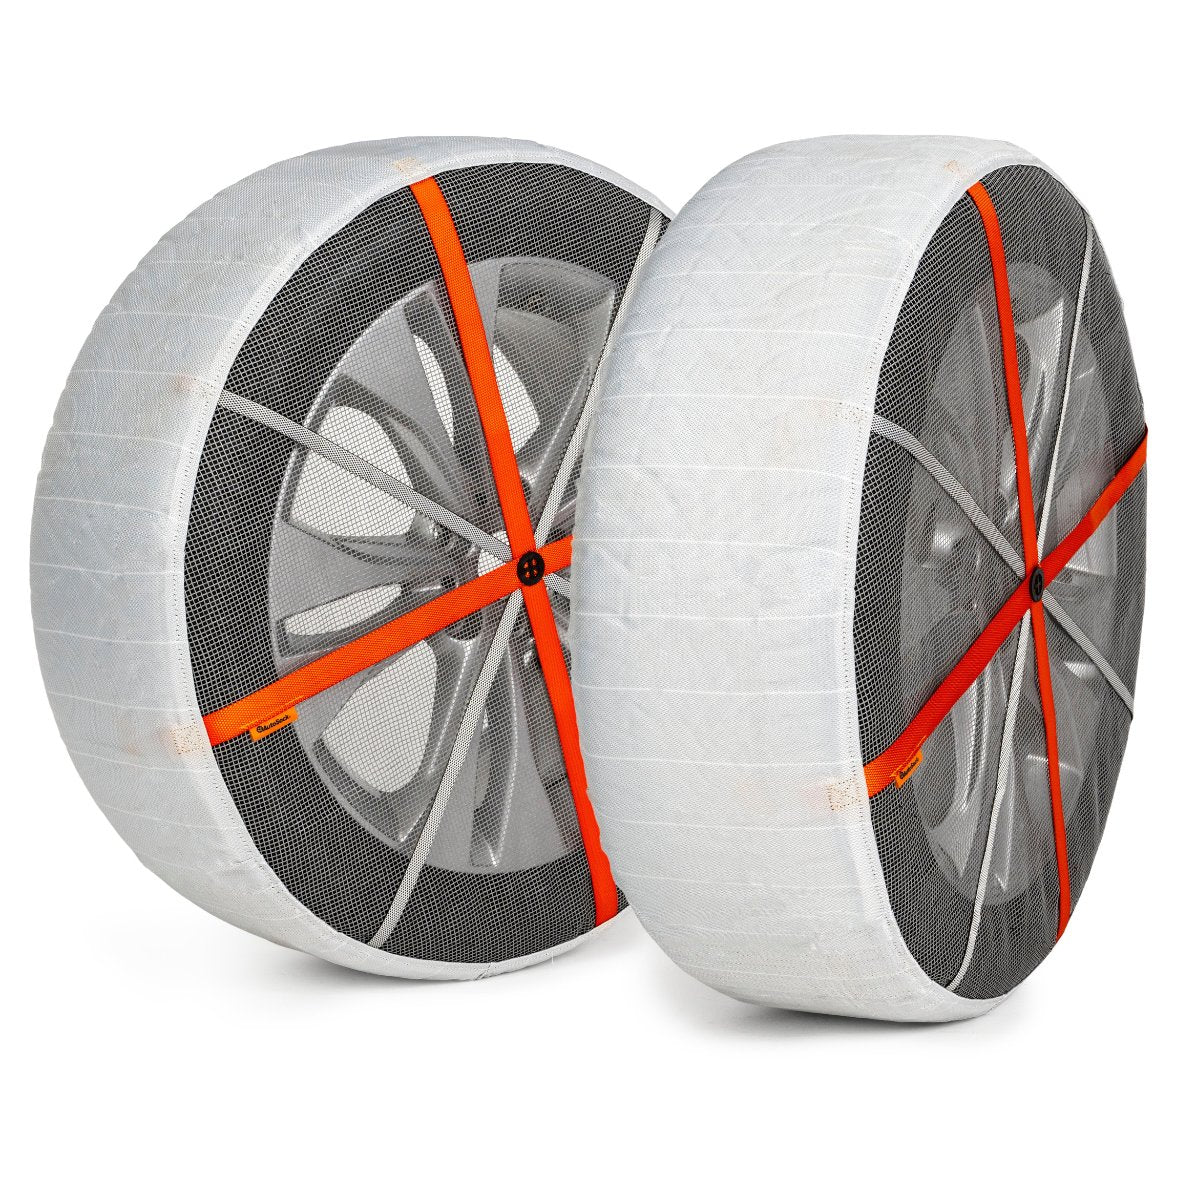 Pair of AutoSock textile snow chains installed on two wheels in front of white background showing product frontside AL89 AL 89